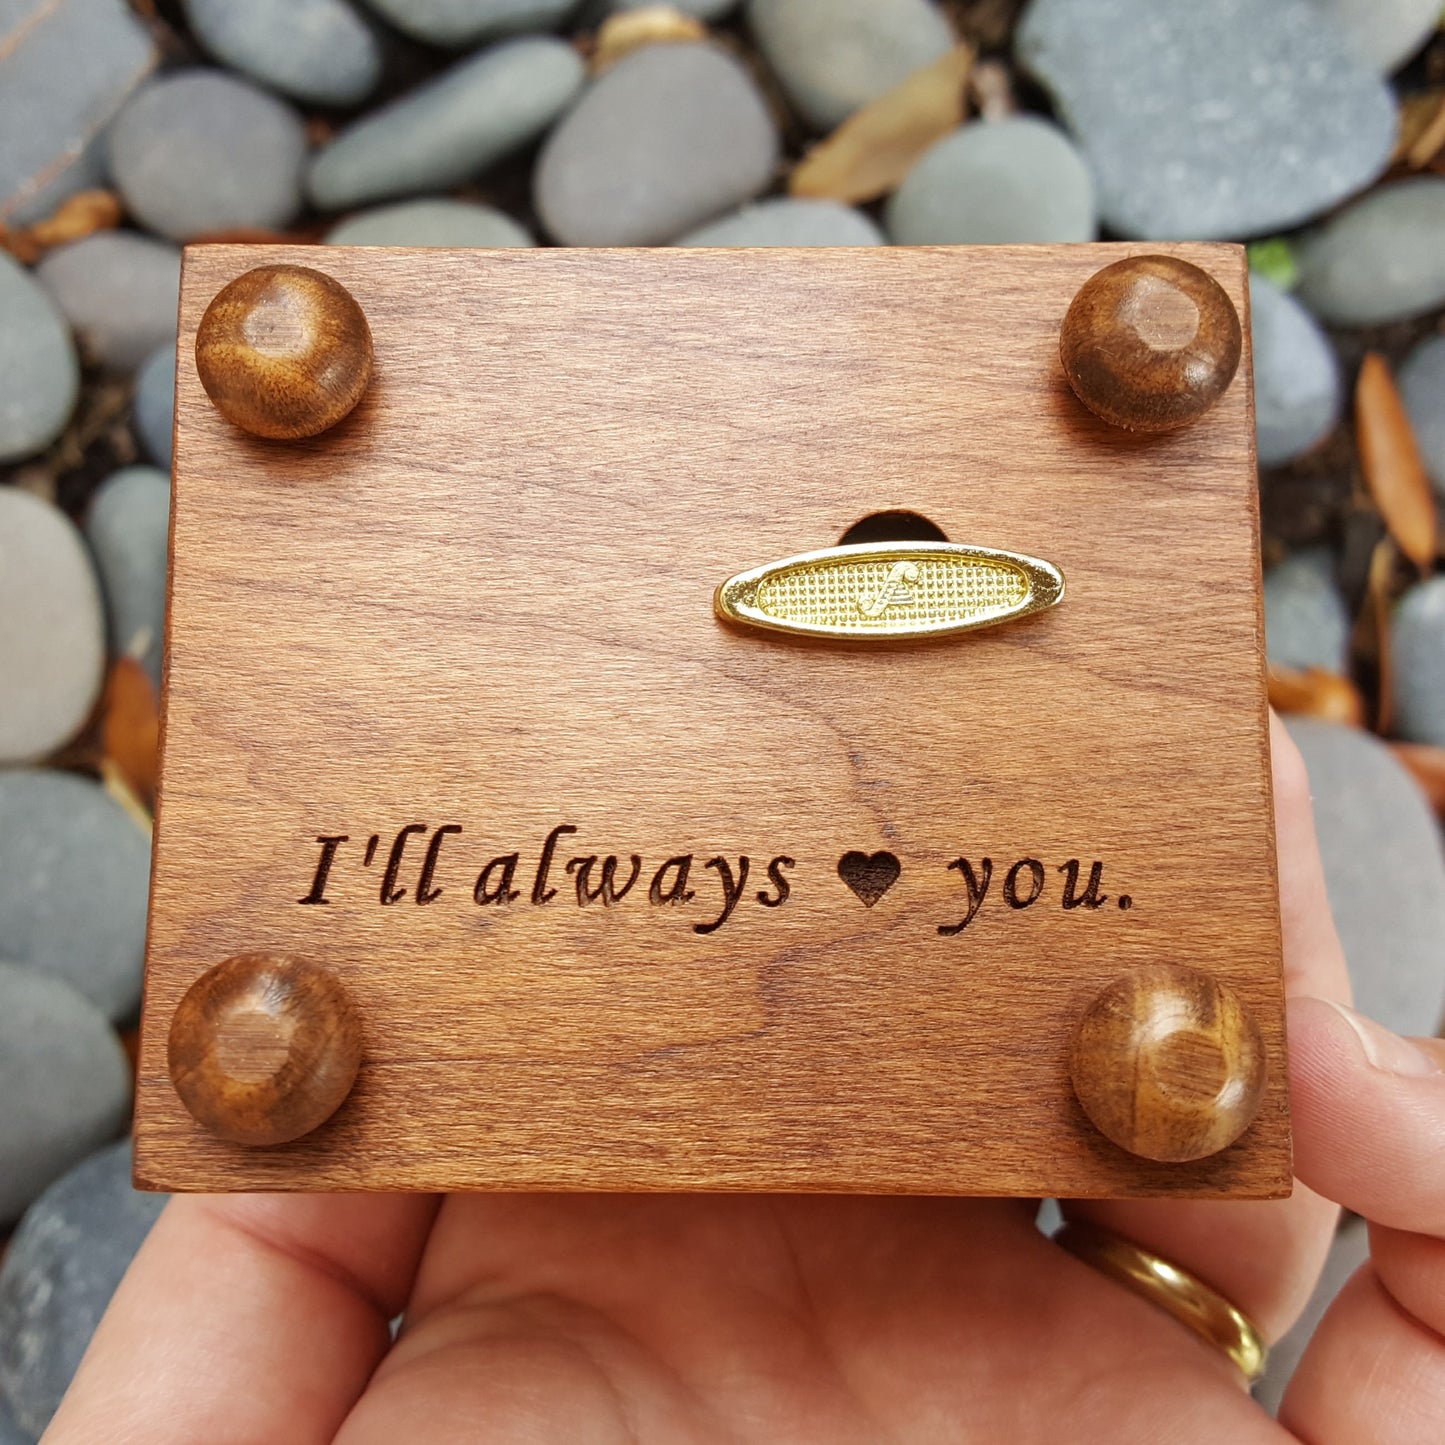 music box bottom side showing personalized engraving I'll always love you